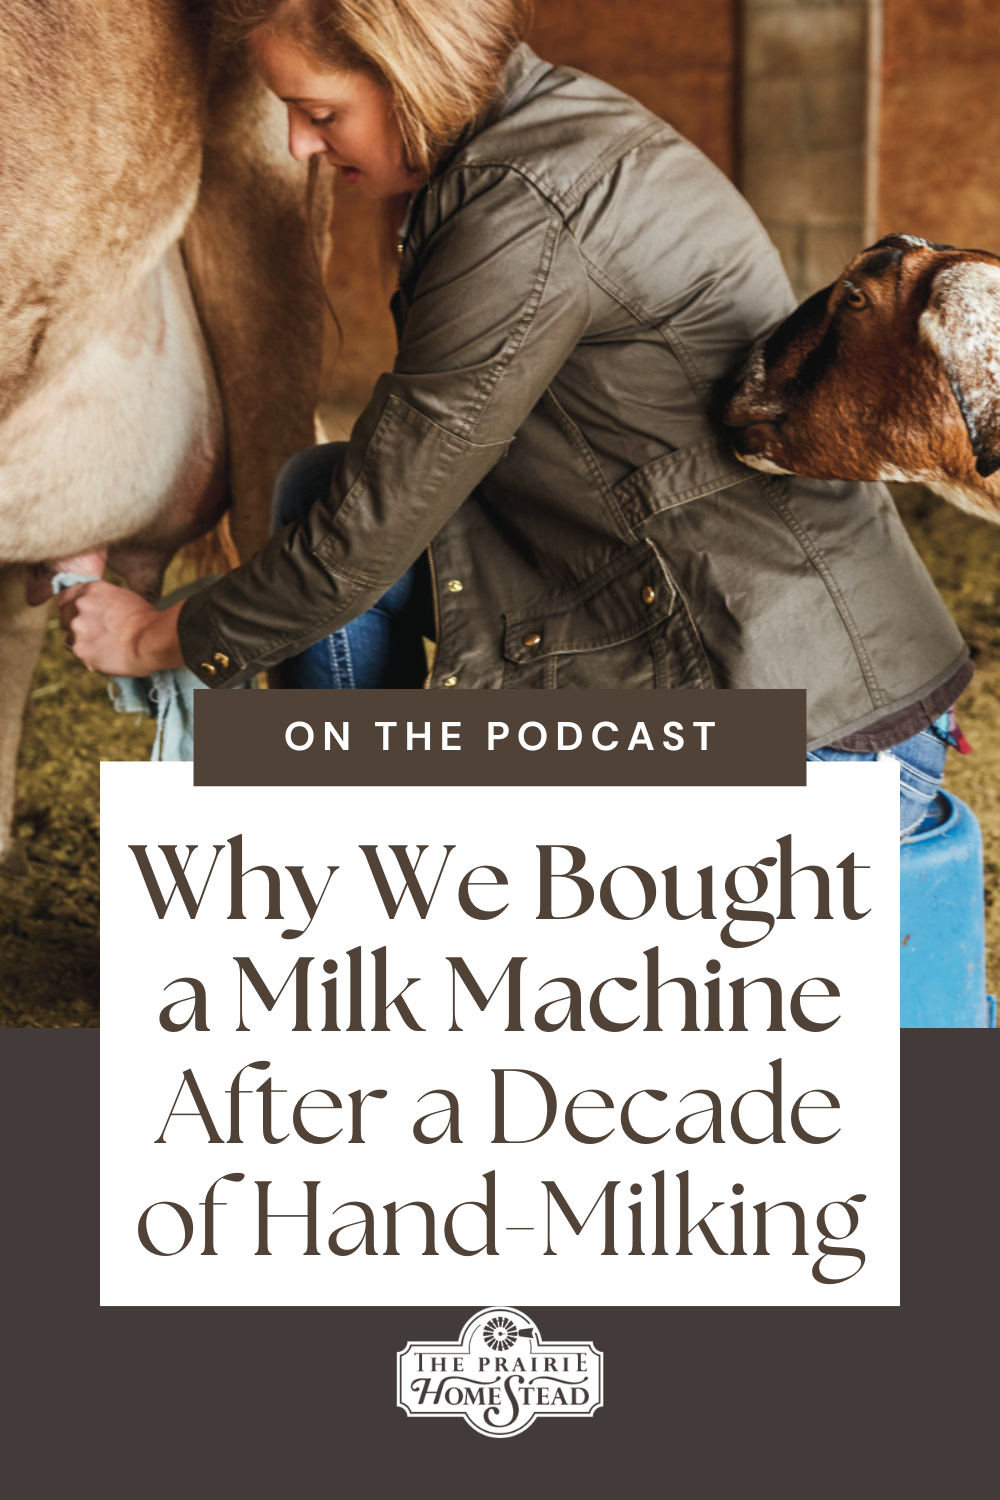 Why We Bought a Milk Machine After a Decade of Hand-Milking